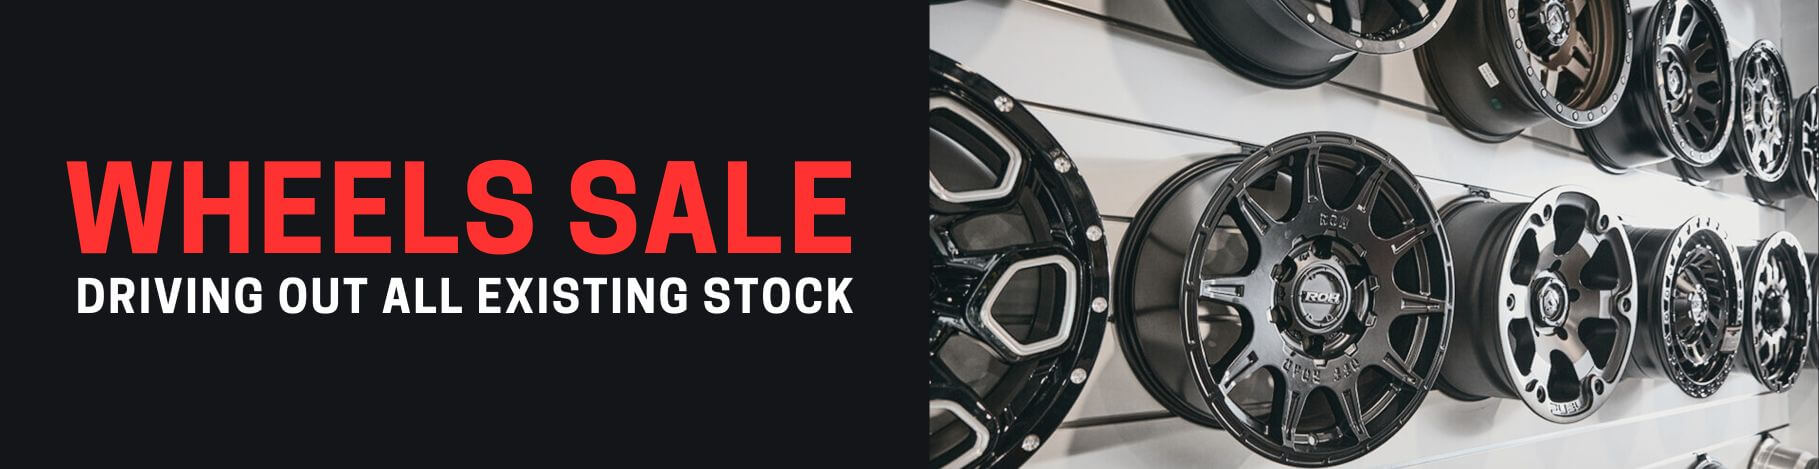 Wheels Sale - Driving out all existing stock